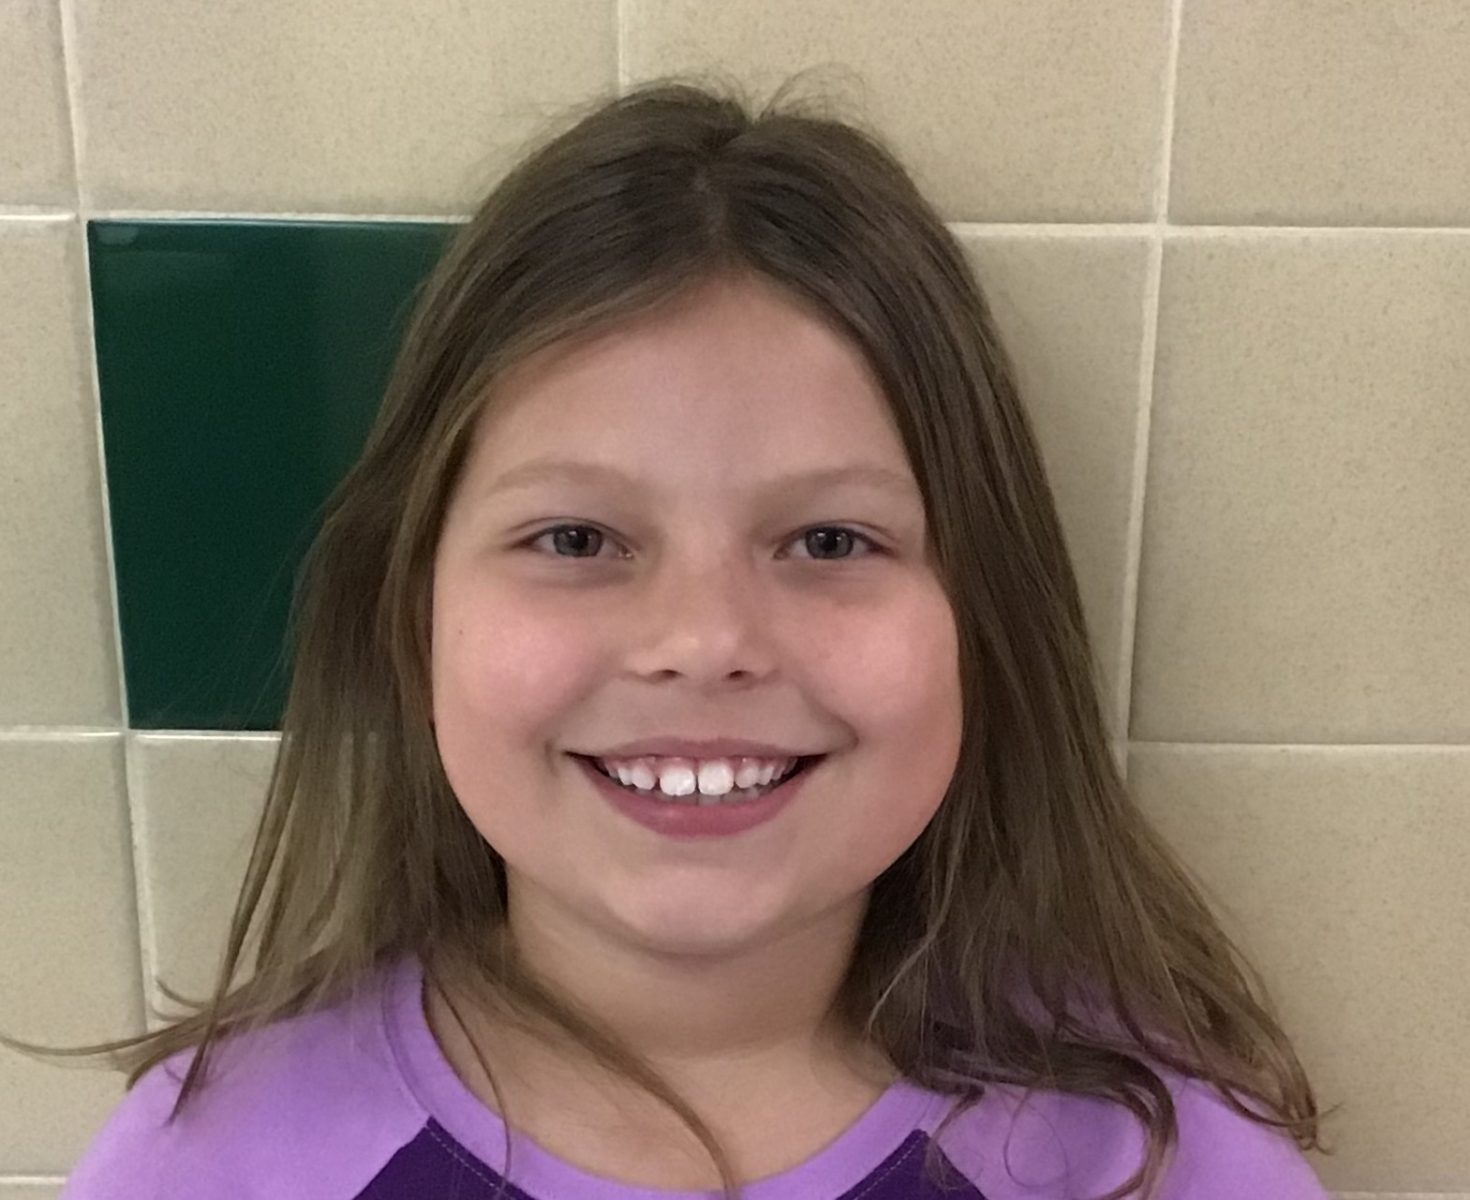 Pankow named Student of the Week